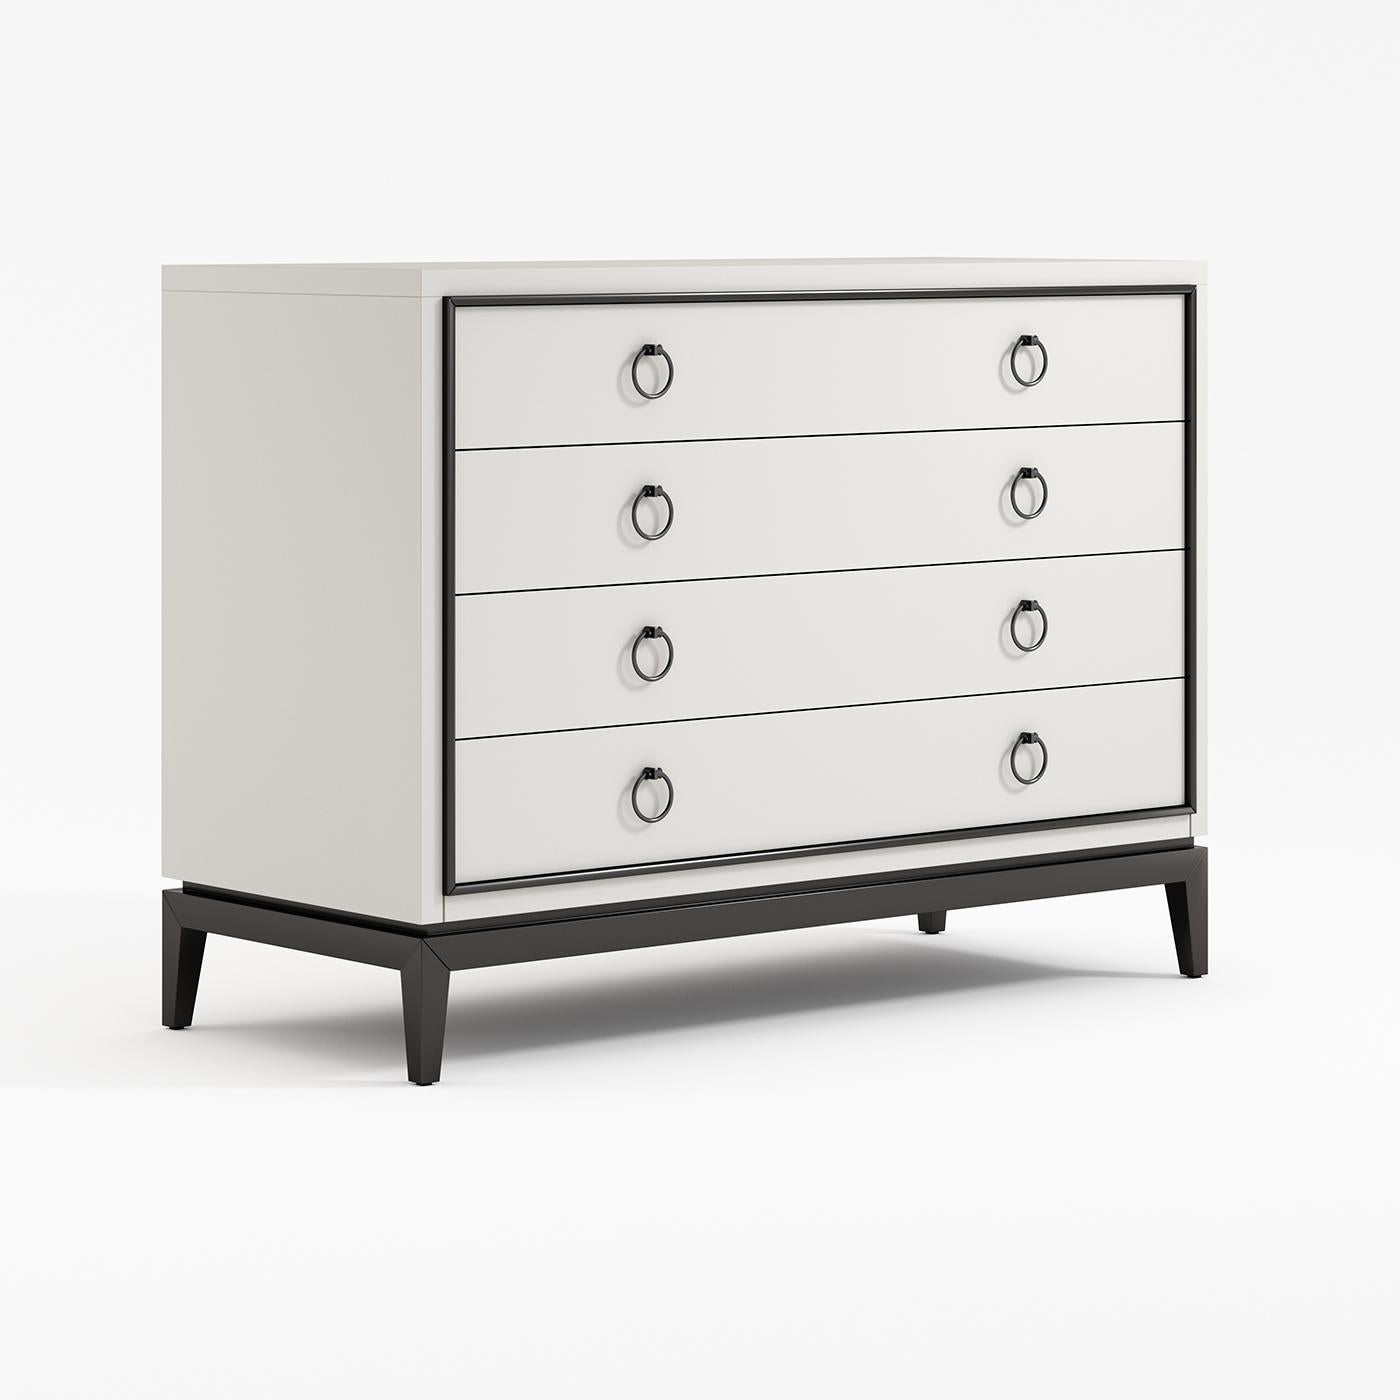 Timeless elegance and a striking color block combination are the distinctive traits of this chest of four drawers. The solid wood base and profiles are adorned with black lacquer, while the sides, top, and front panels of the drawers are in white